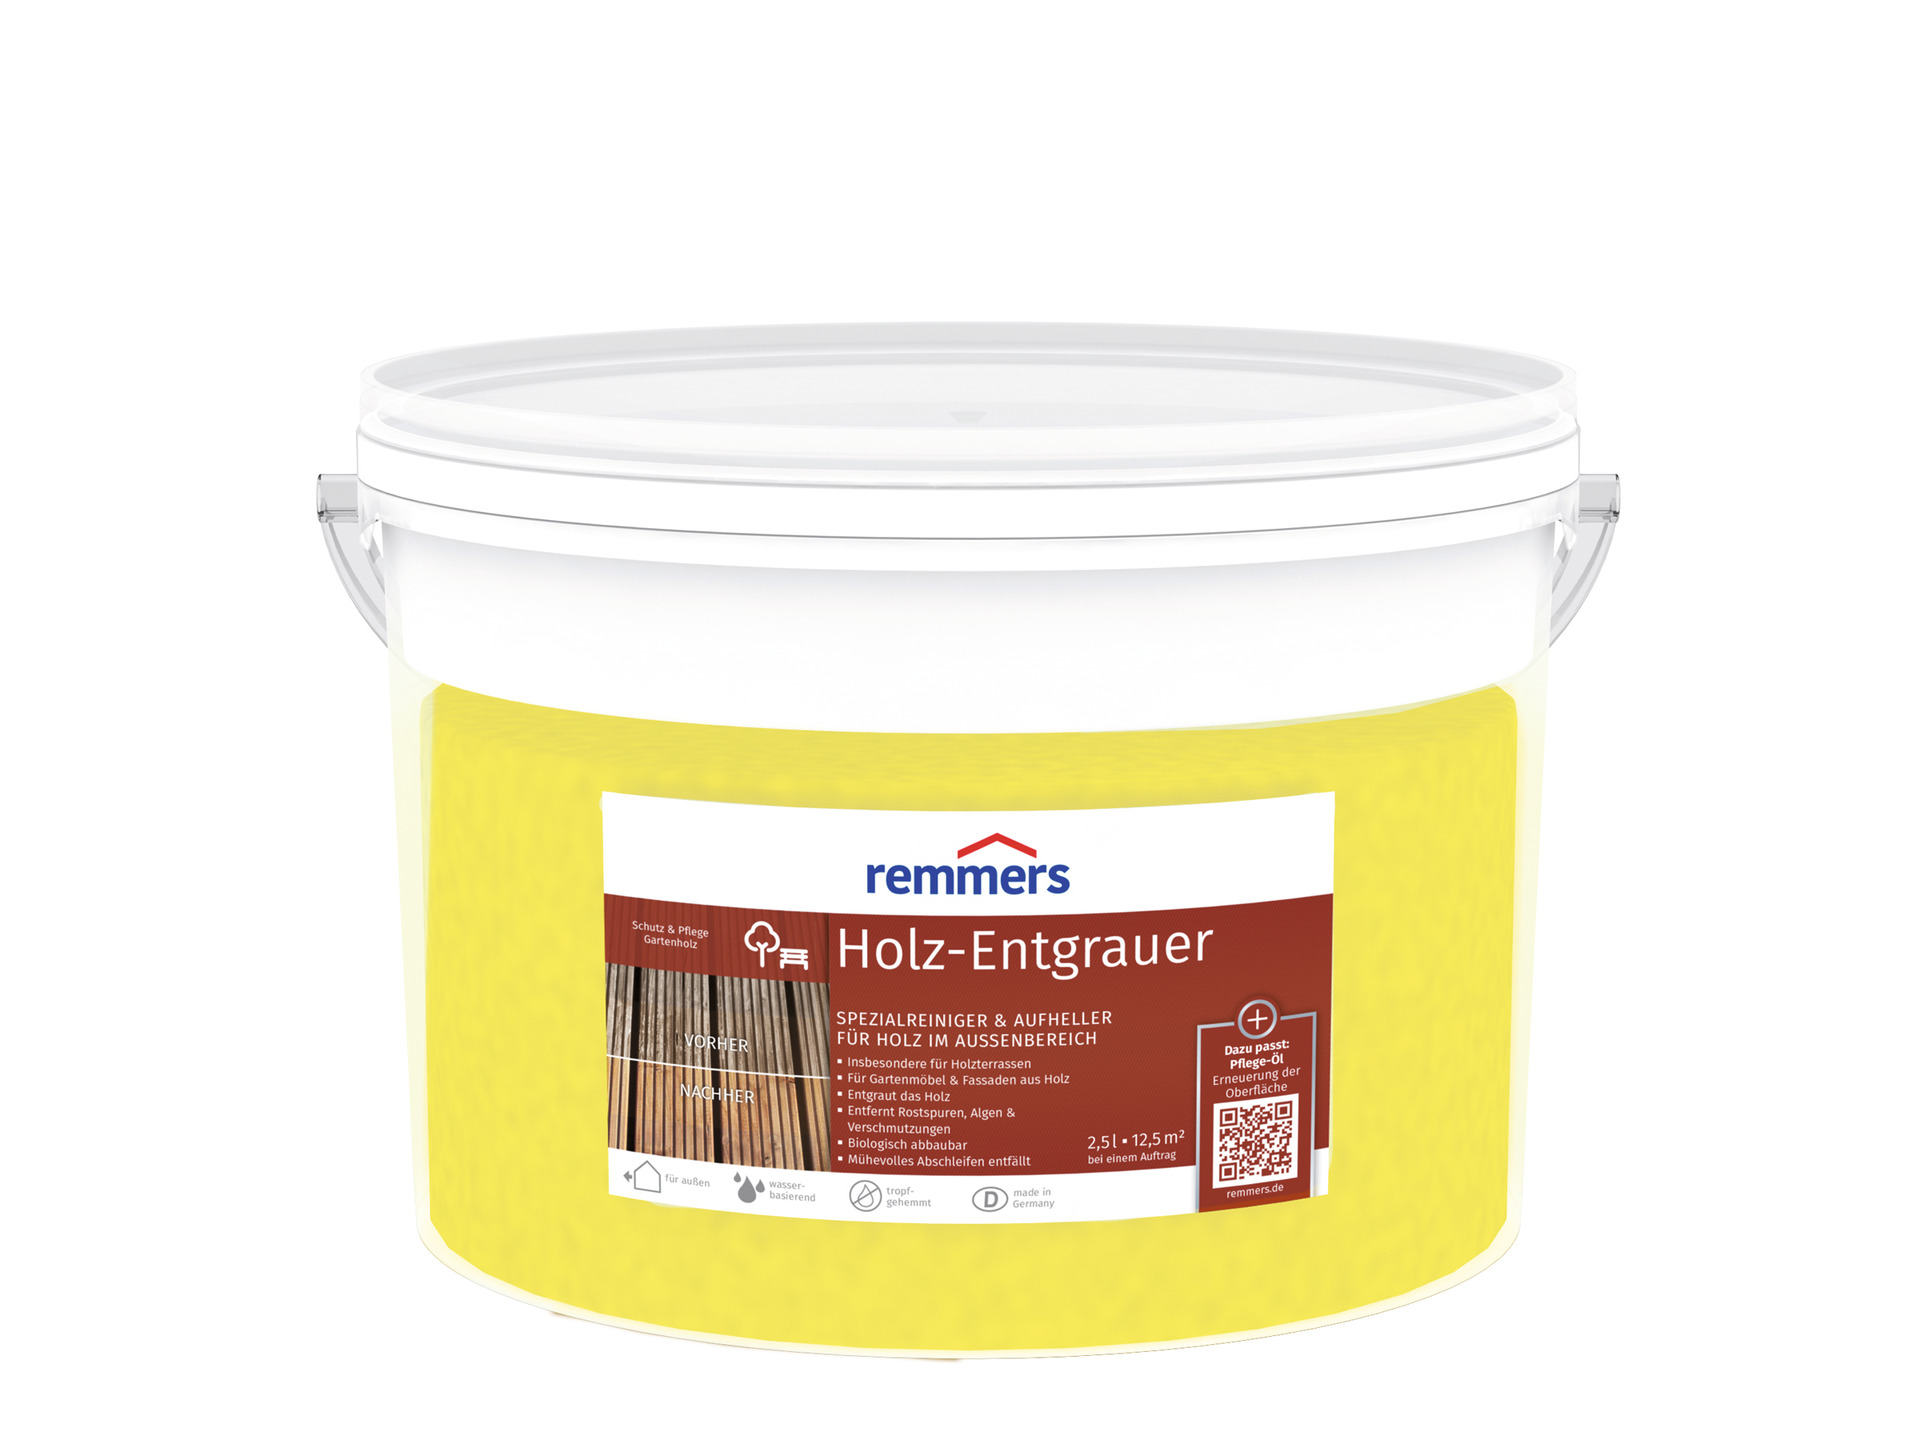 Remmers GmbH Holz-Entgrauer